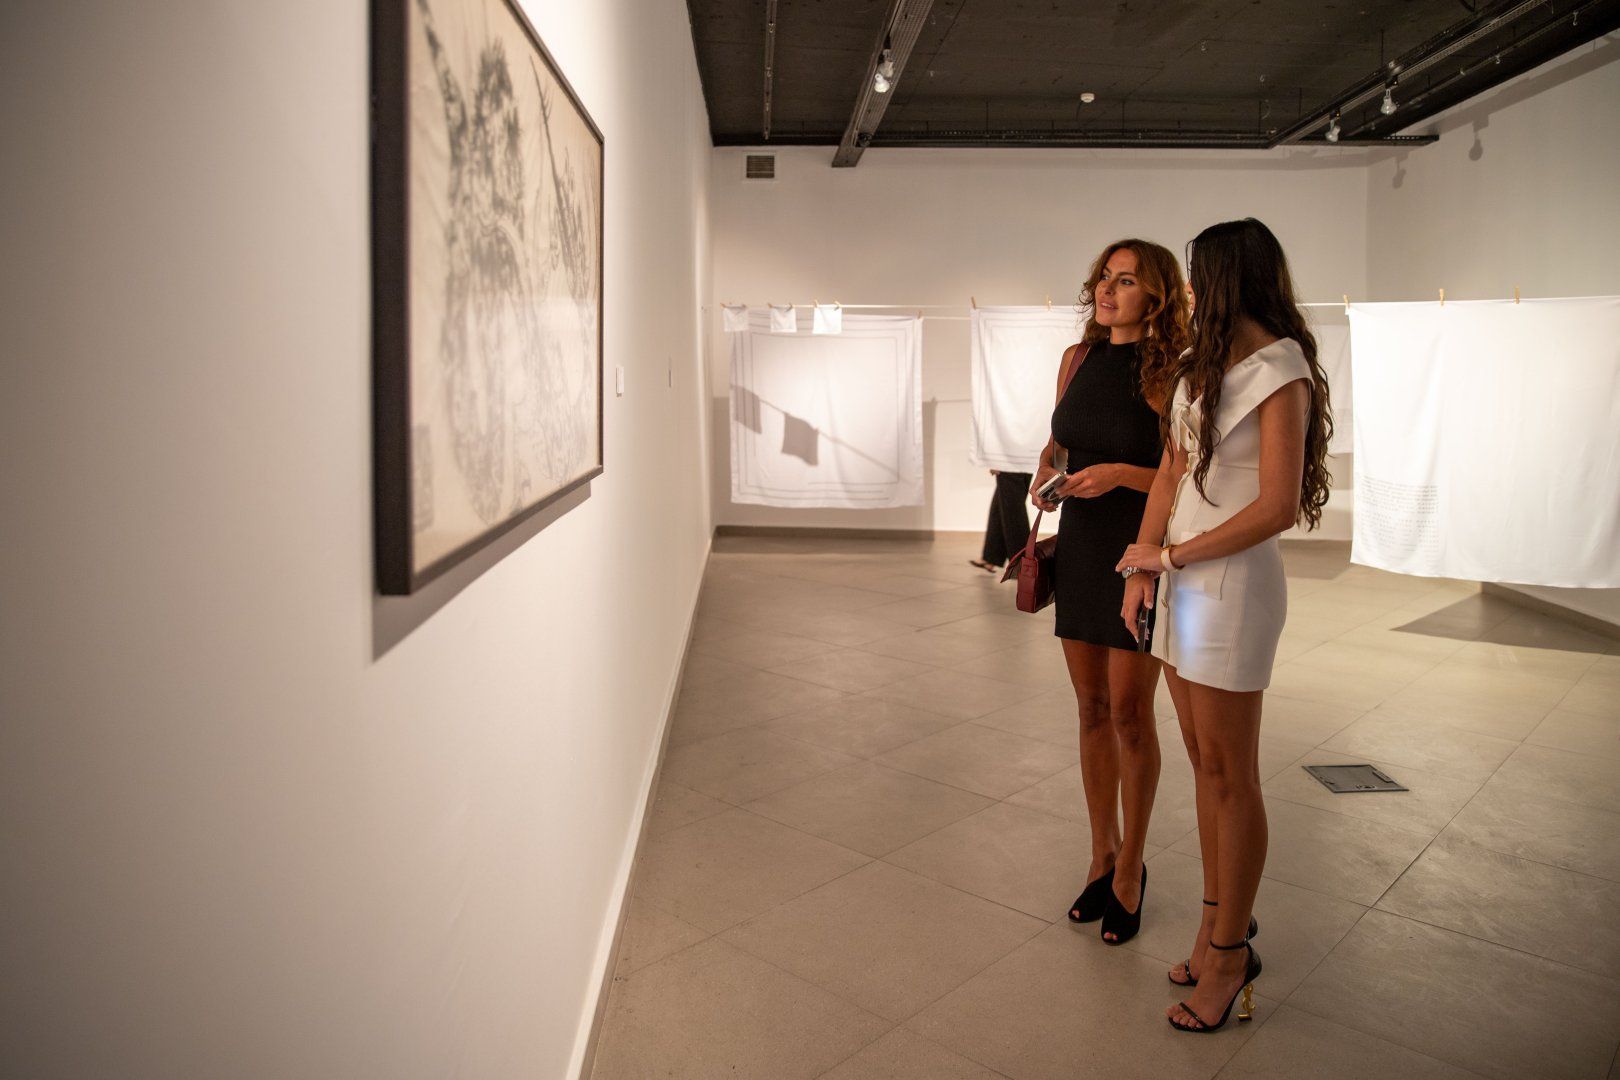 YAY Gallery launches new group exhibition [PHOTOS]